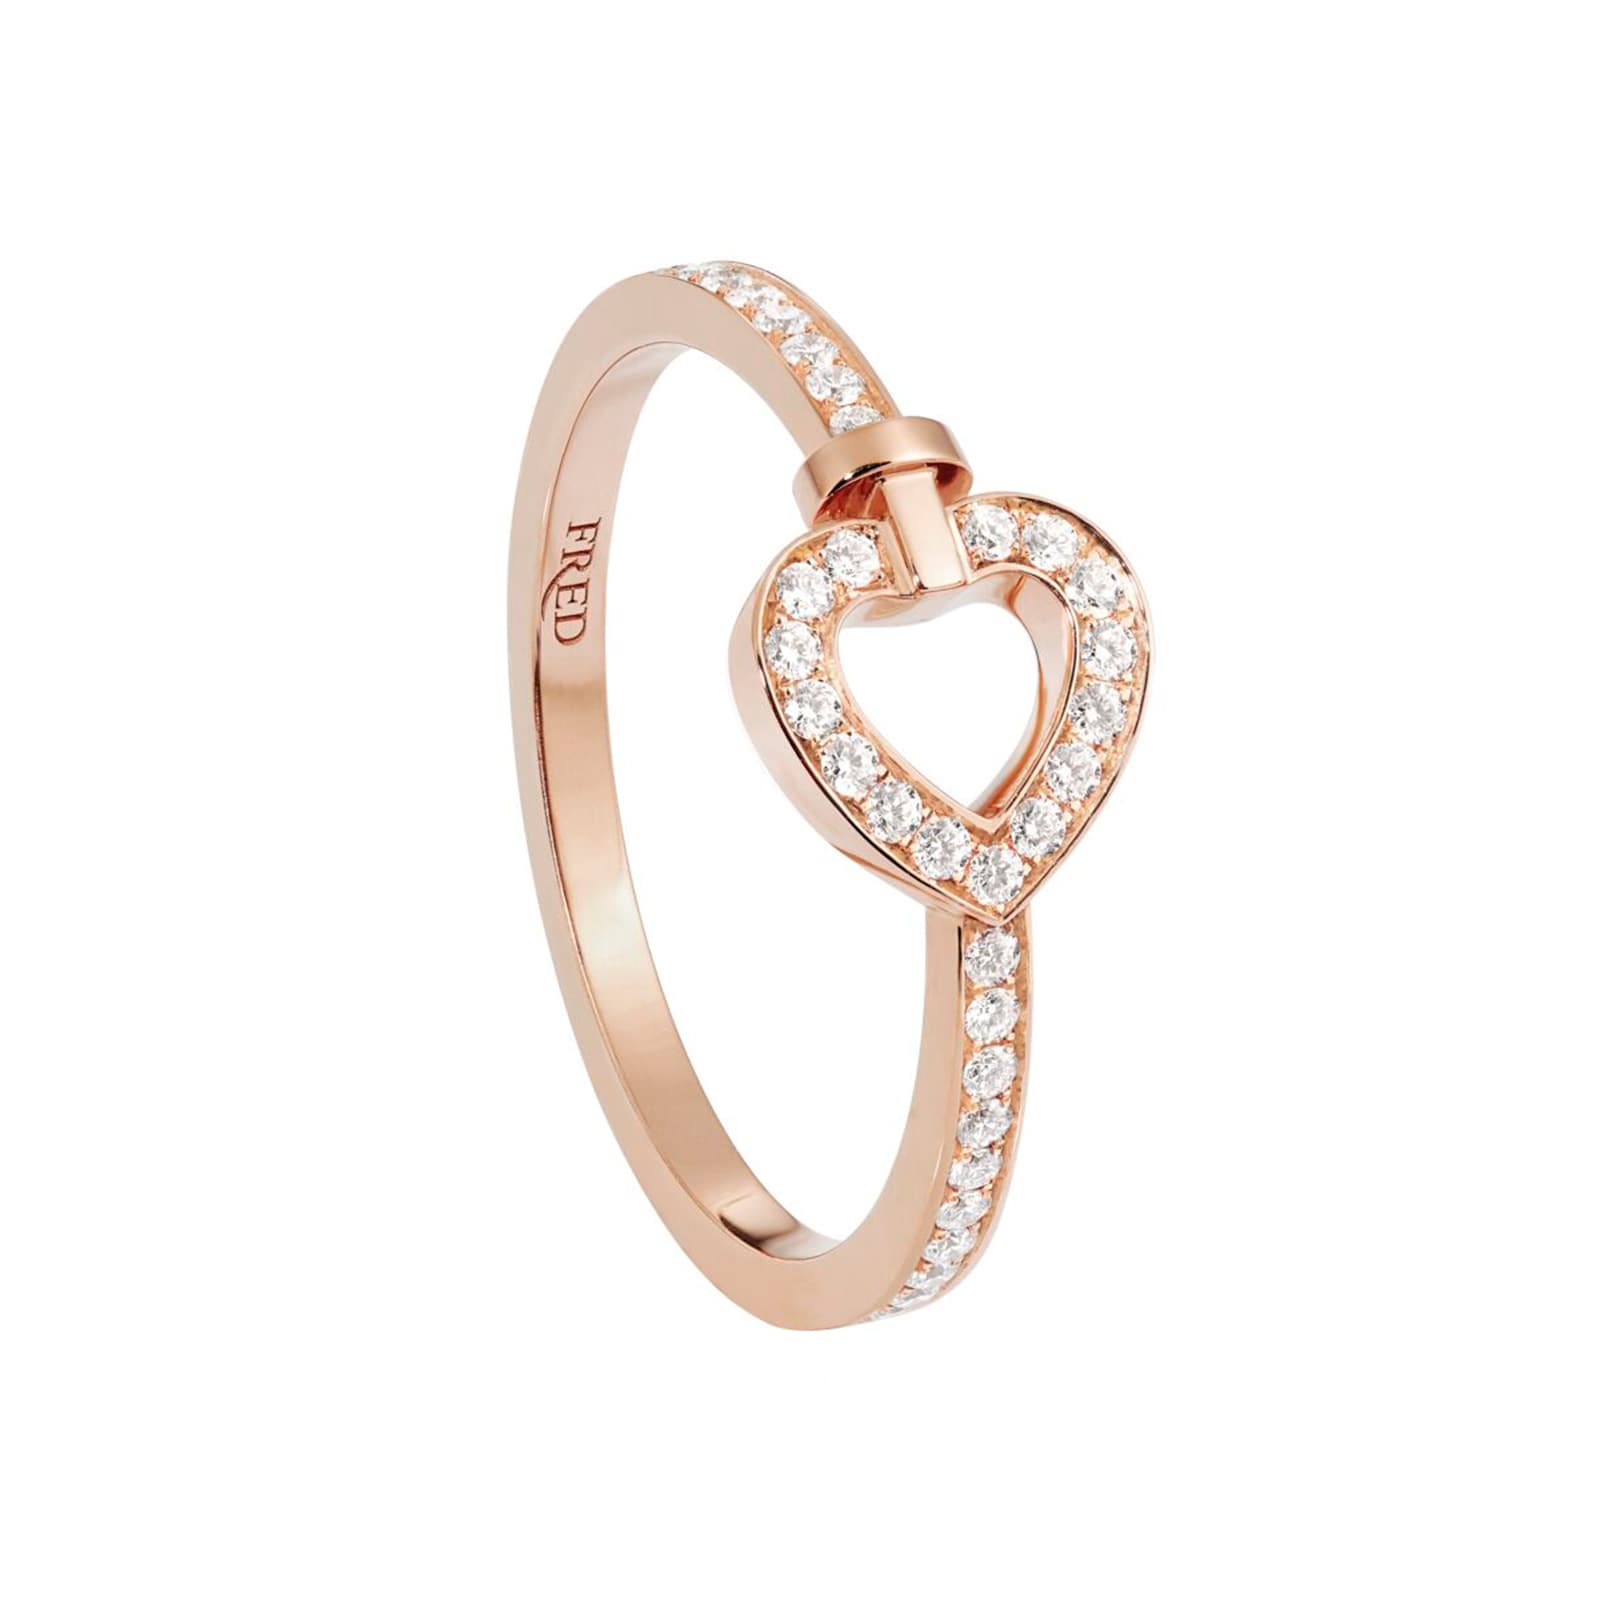 Pretty Woman 18ct Rose Gold 0.21ct Diamond Ring - Ring Size L